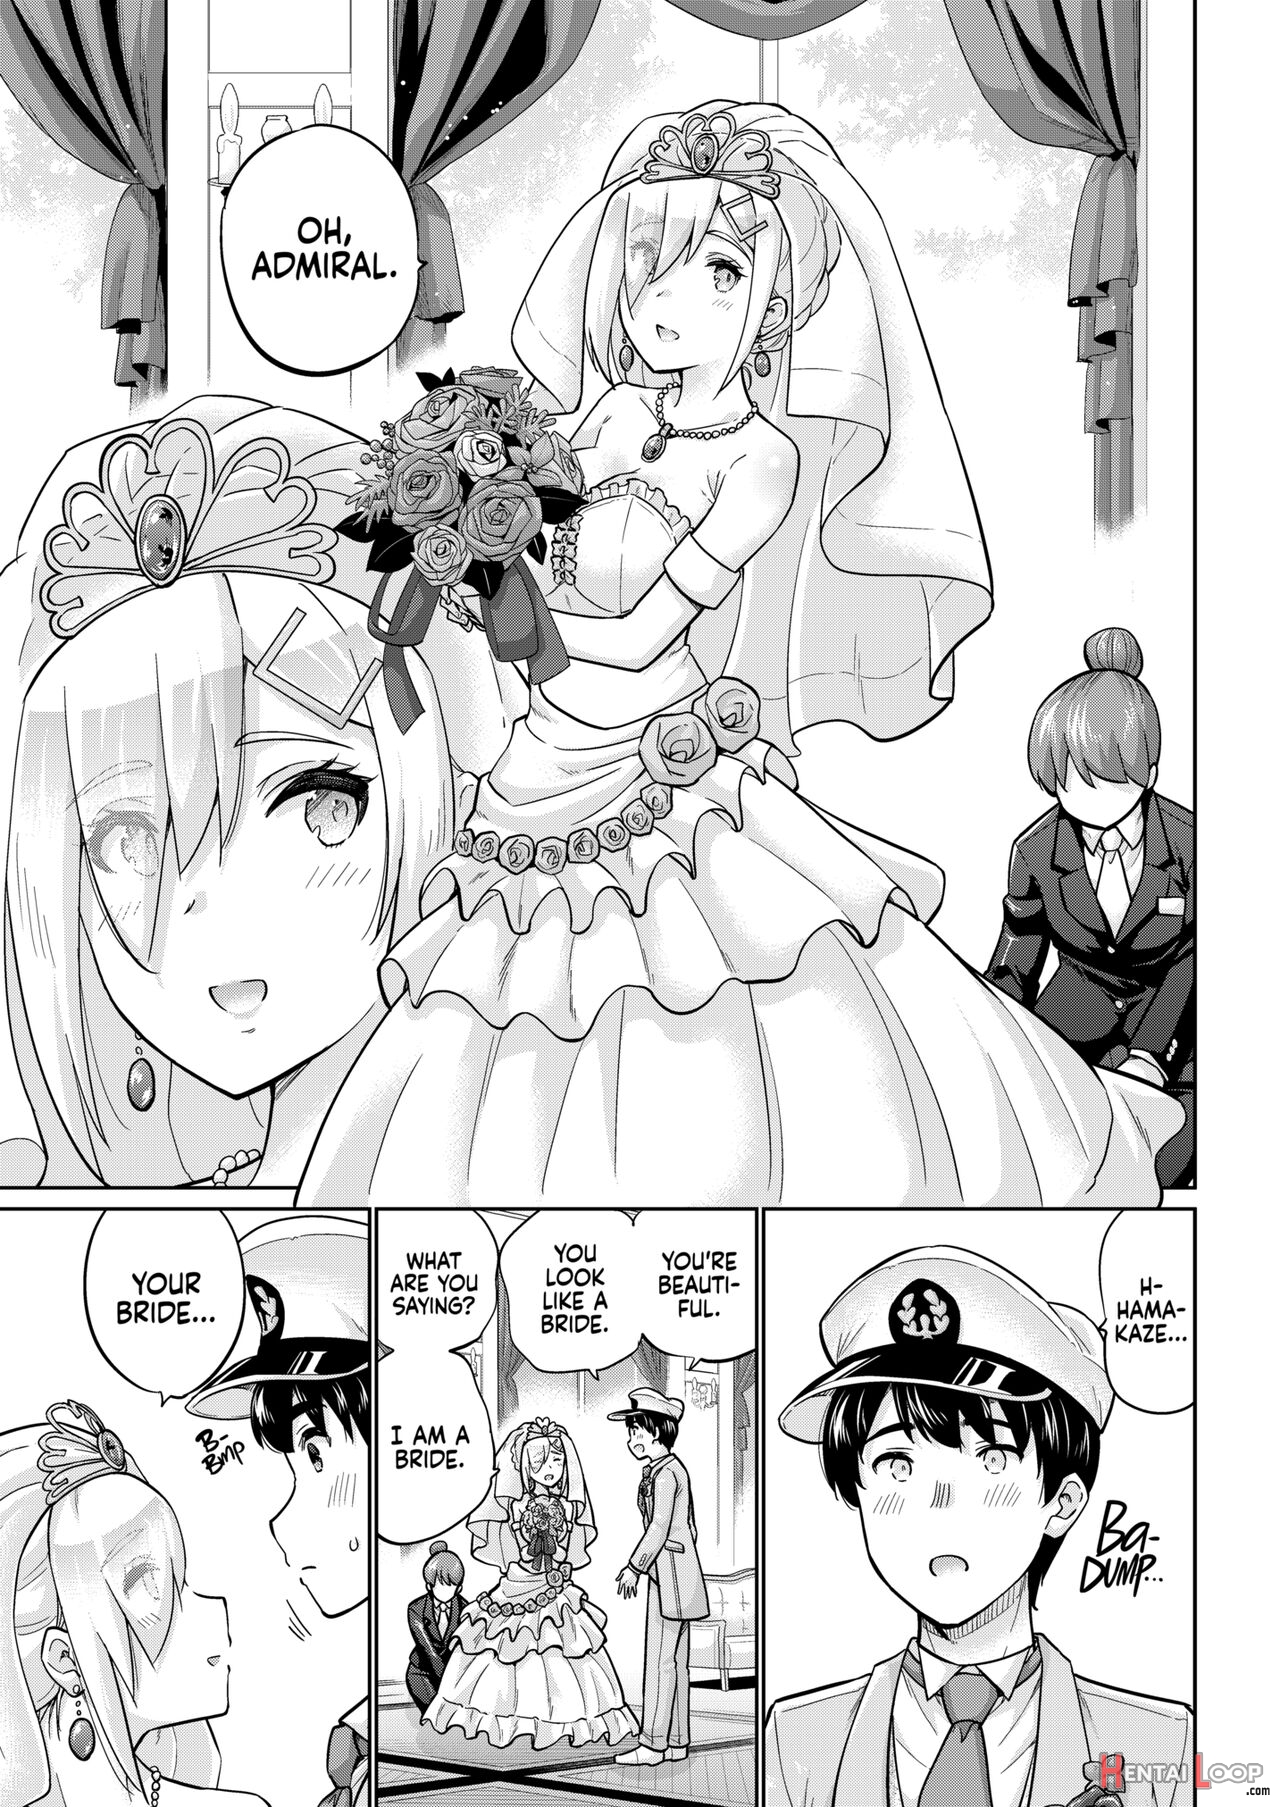 The Day Hamakaze And I Got Married page 5